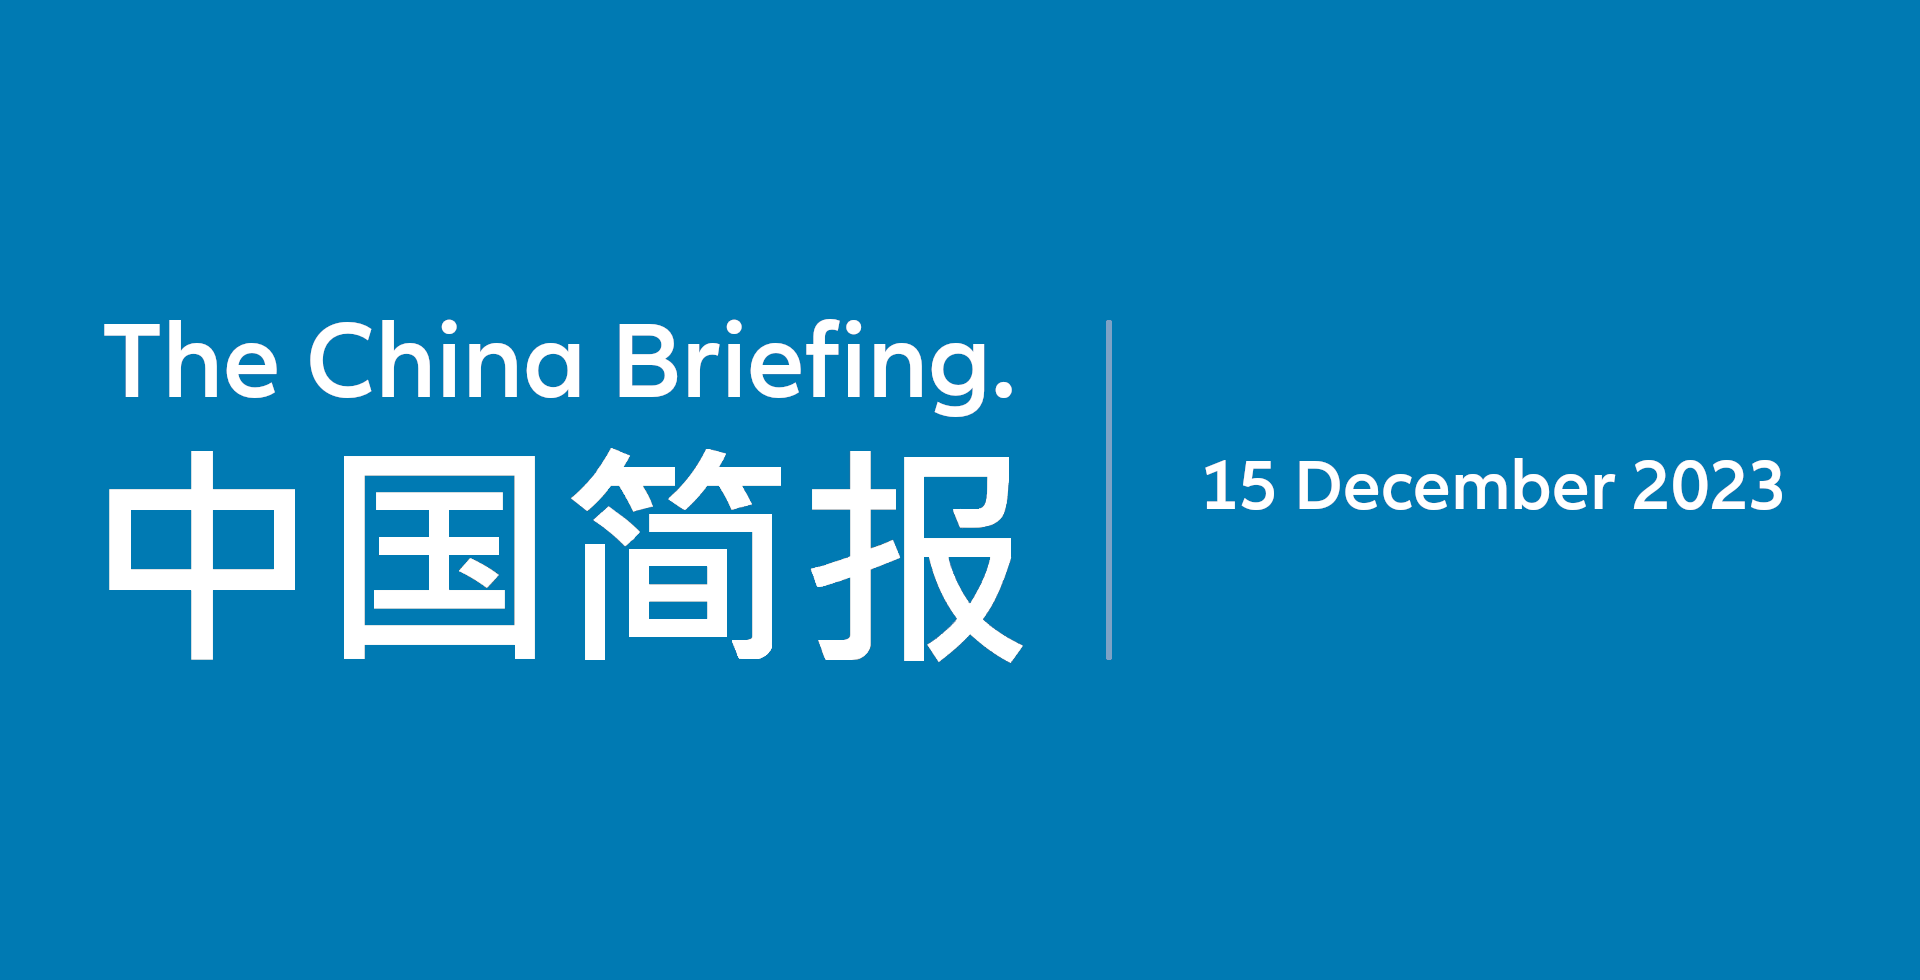 The China Briefing: Expectations of China’s growth trajectory